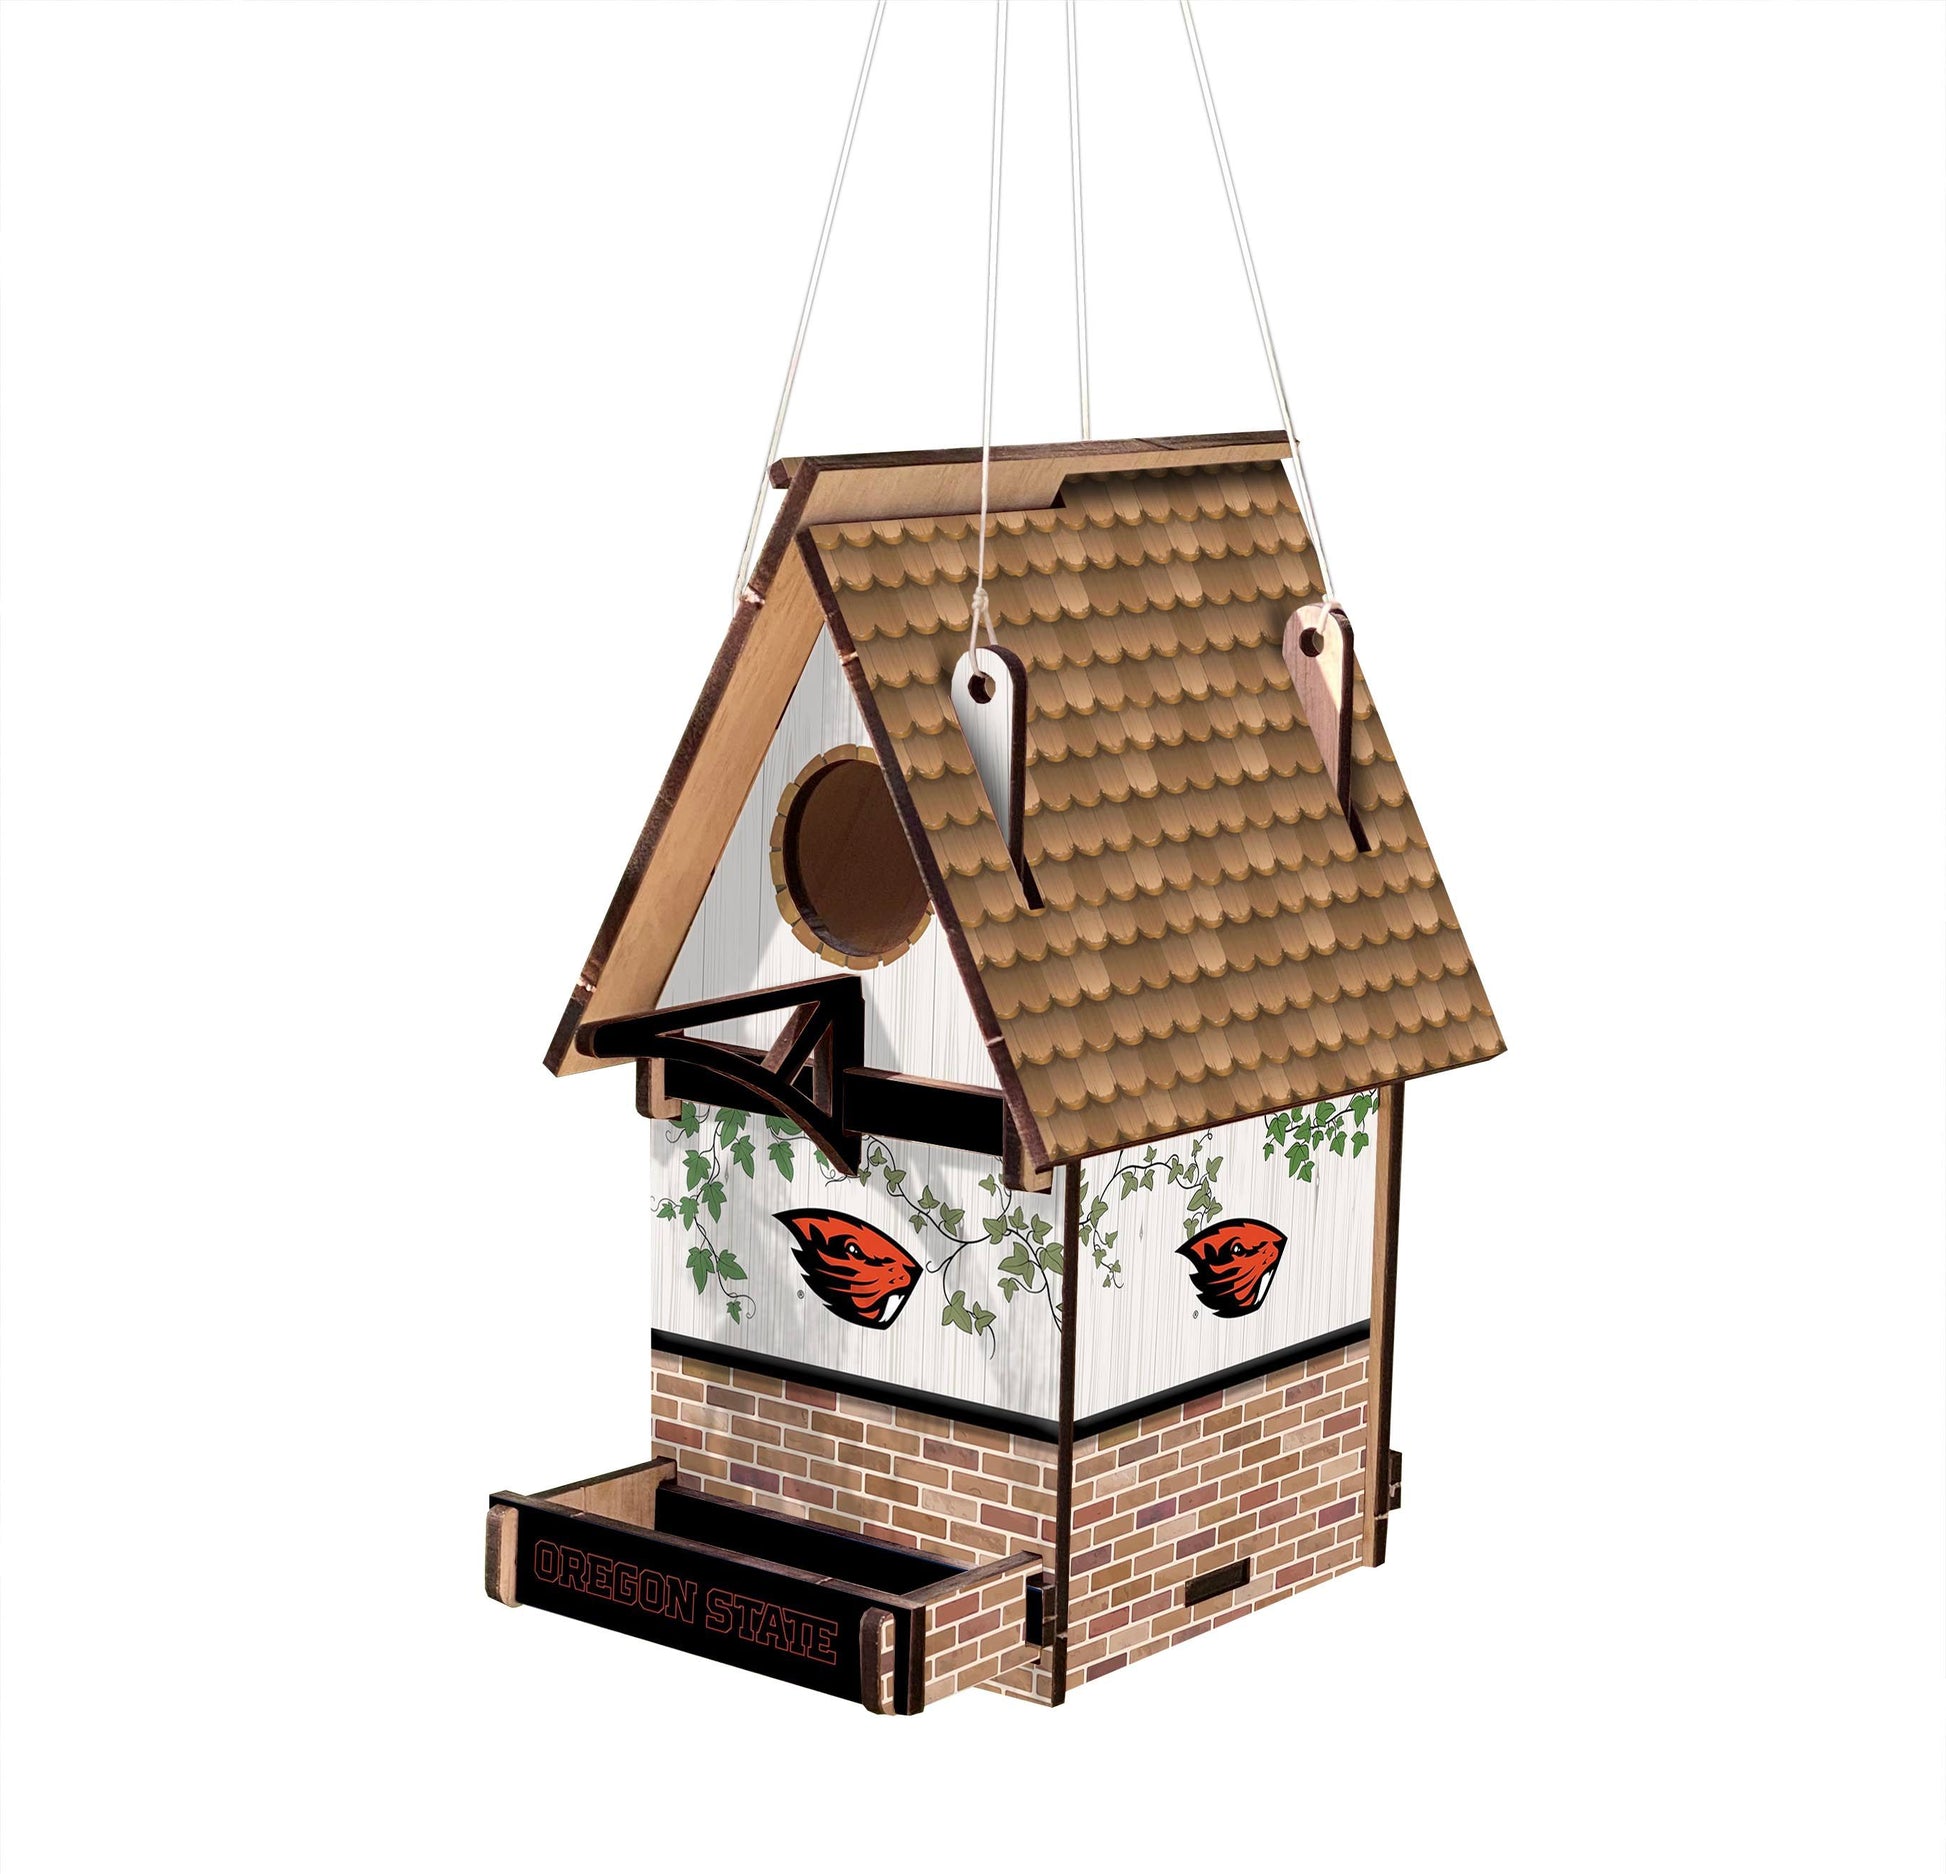 Show off your Oregon State fan pride with this officially licensed wood birdhouse. Crafted in the USA from MDF, the birdhouse boasts Oregon State colors and graphics to make it stand out.